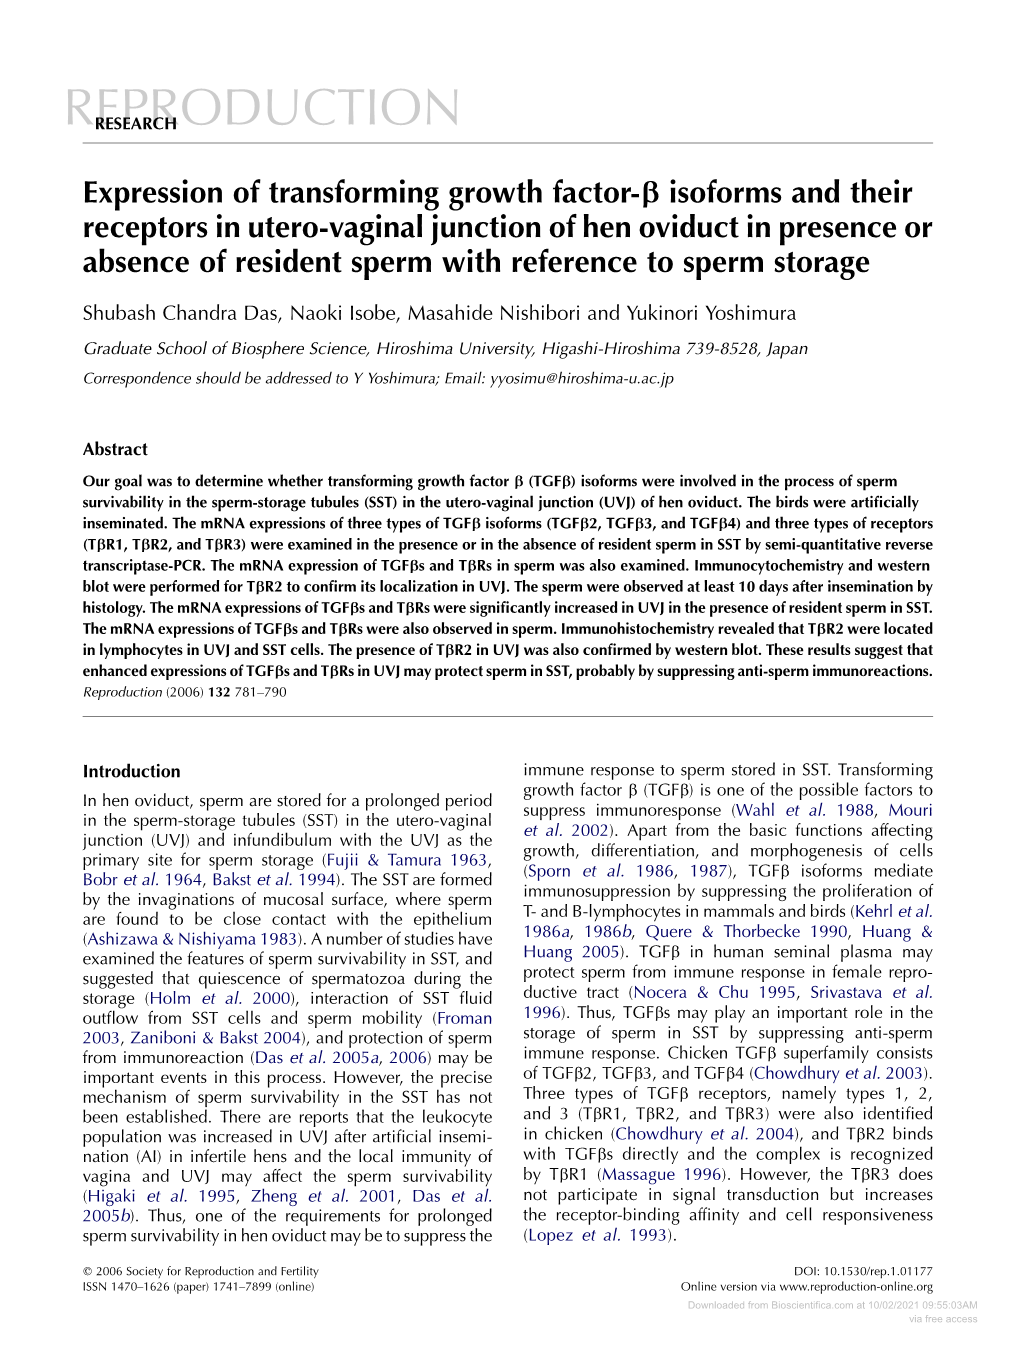 Expression of Transforming Growth Factor-Β Isoforms and Their Receptors